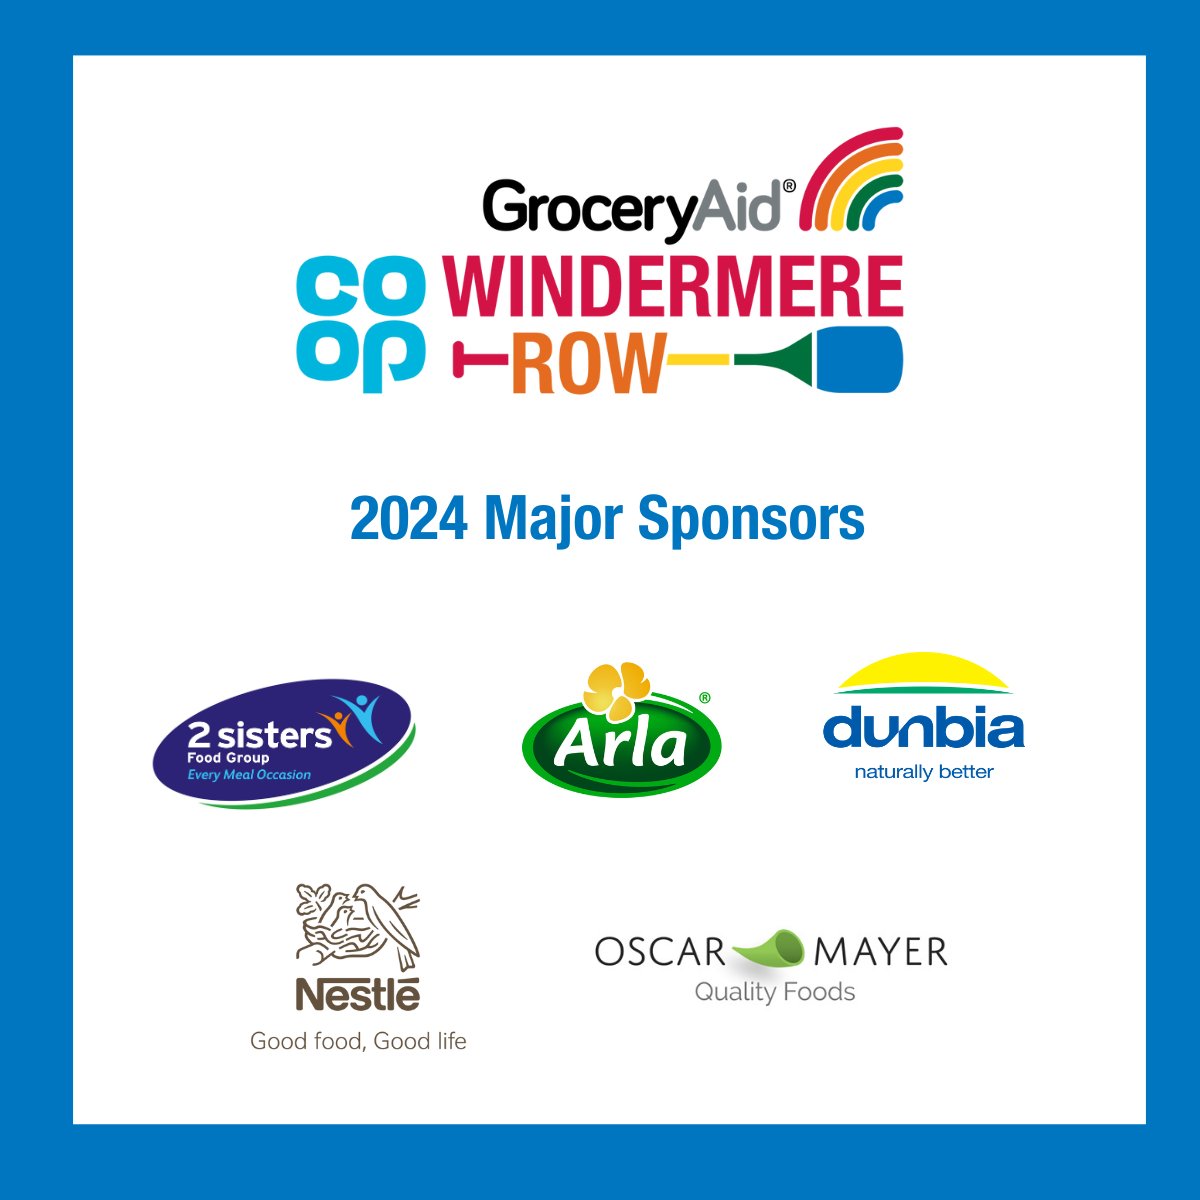 Just over two weeks to go until our sell-out event, the @Coopuk Windermere Row. Big thank you to our major sponsors: 2 Sisters Food Group, Arla, Dunbia, Nestle and Oscar Mayer. See more information about the event here: ow.ly/SLY450R32jy